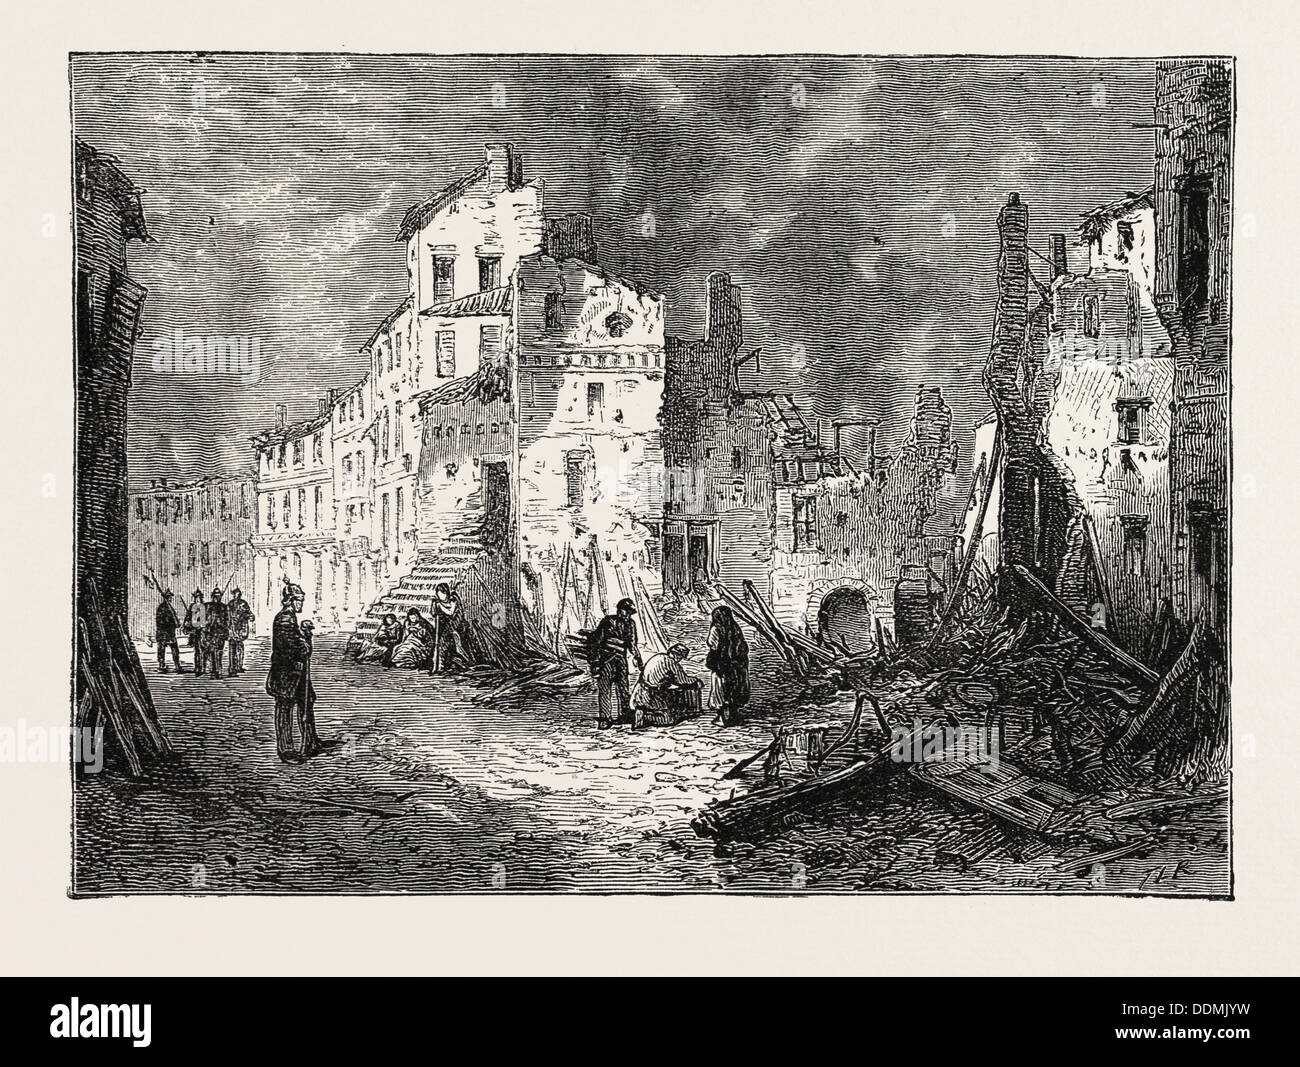 THE FRANCO-PRUSSIAN WAR: RUINS OF THIONVILLE, AFTER THE BOMBARDMENT BY THE PRUSSIANS, FRANCE, 1871 Stock Photo